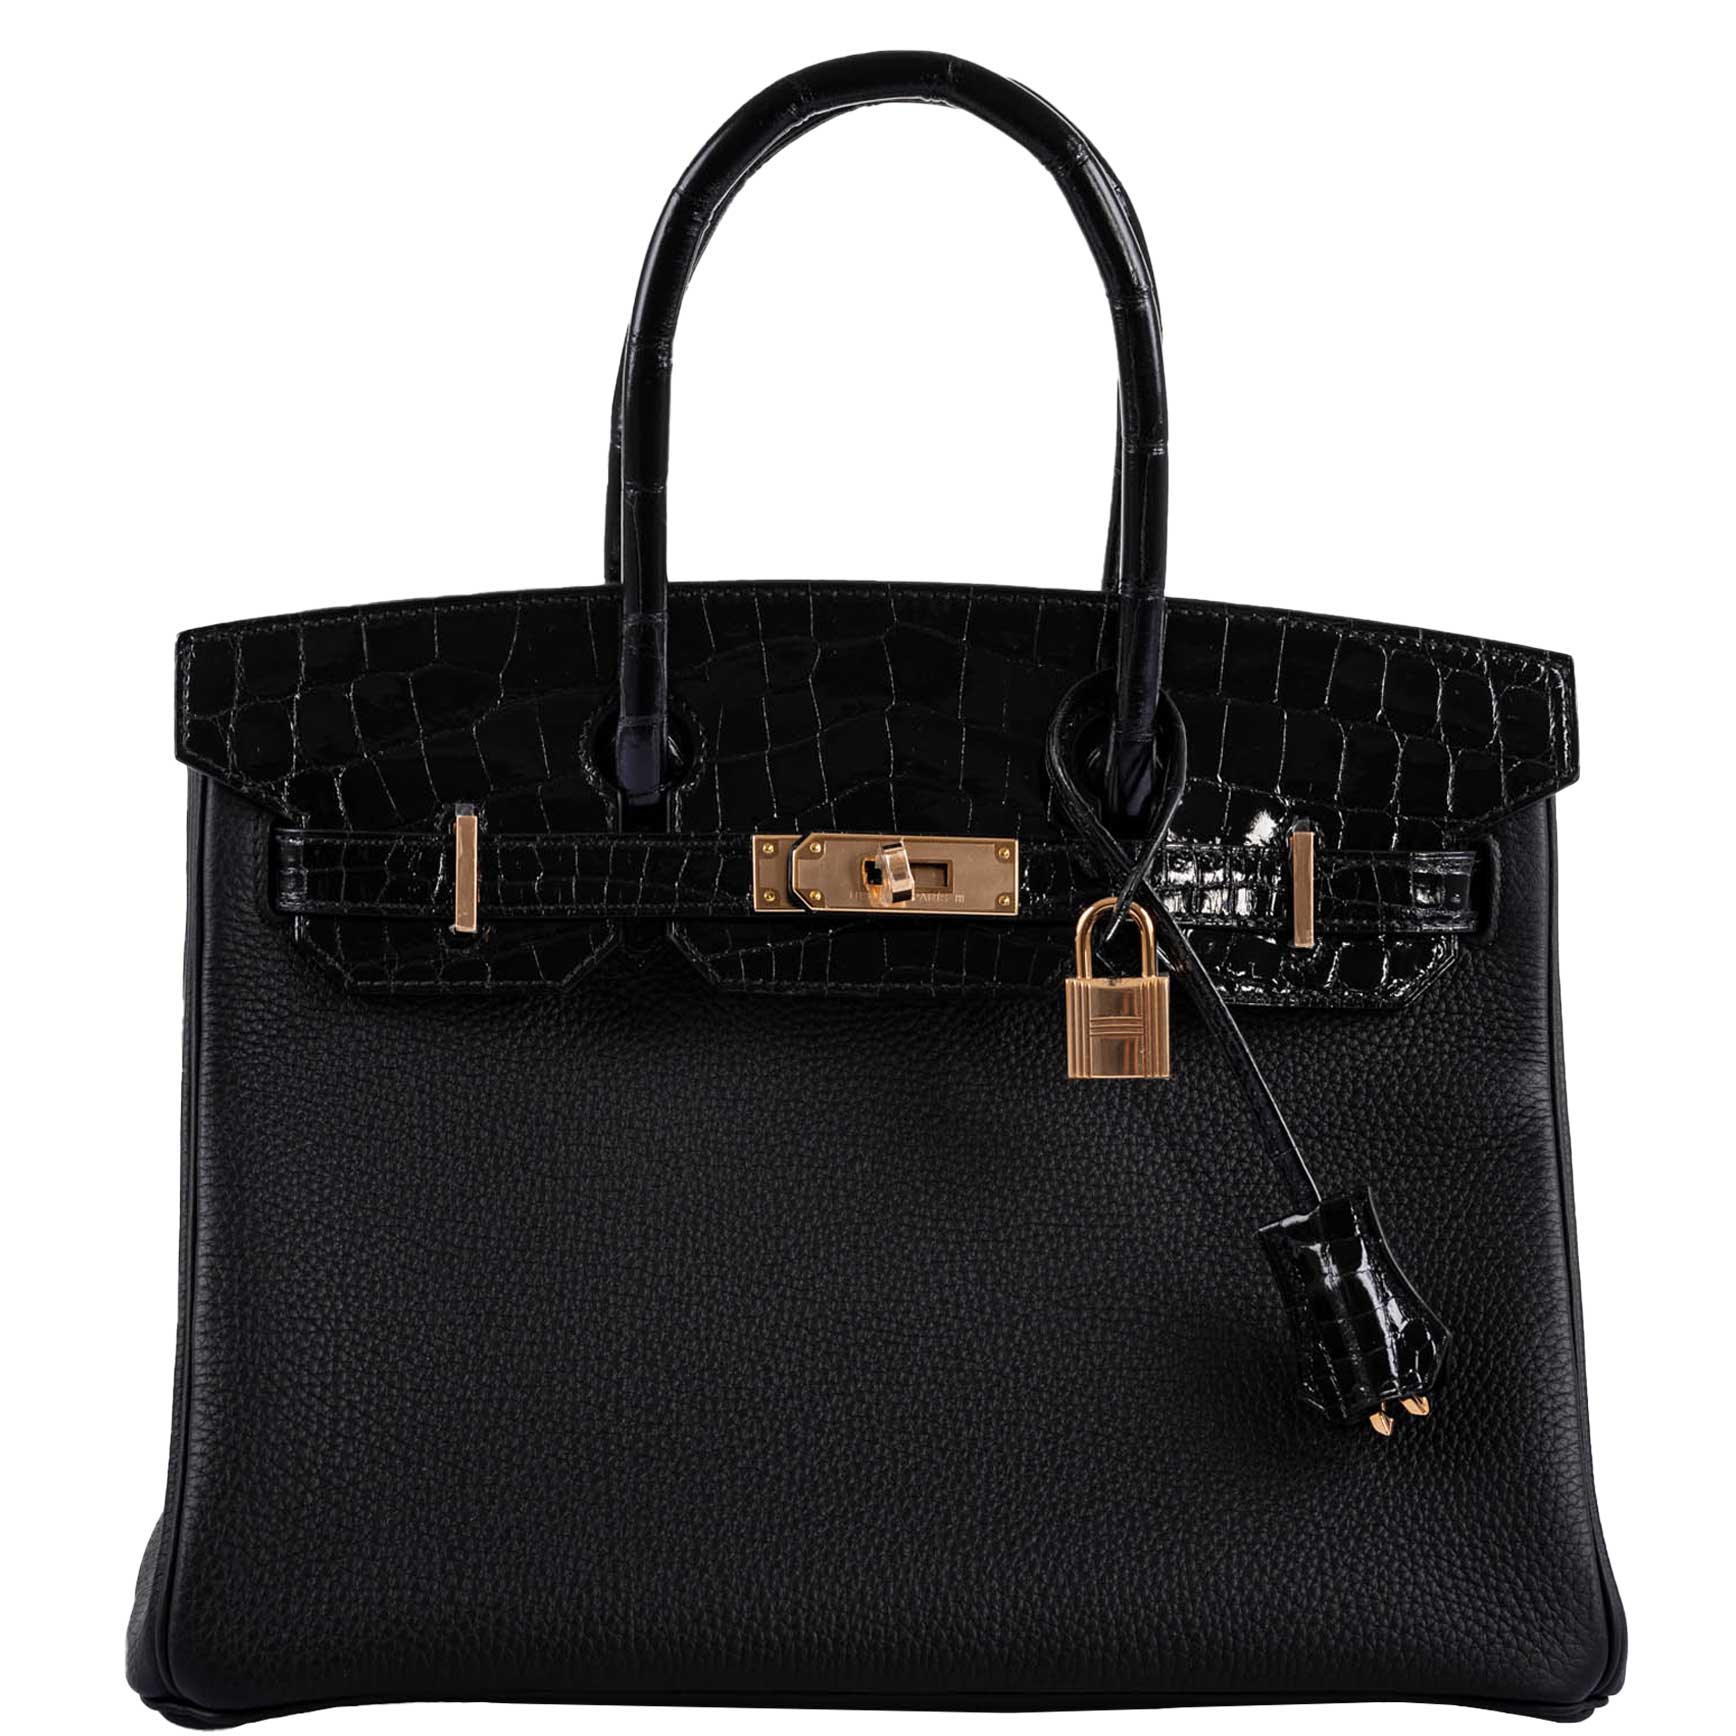 Hermes Birkin Touch bag 30 Bambou Togo leather/ Niloticus